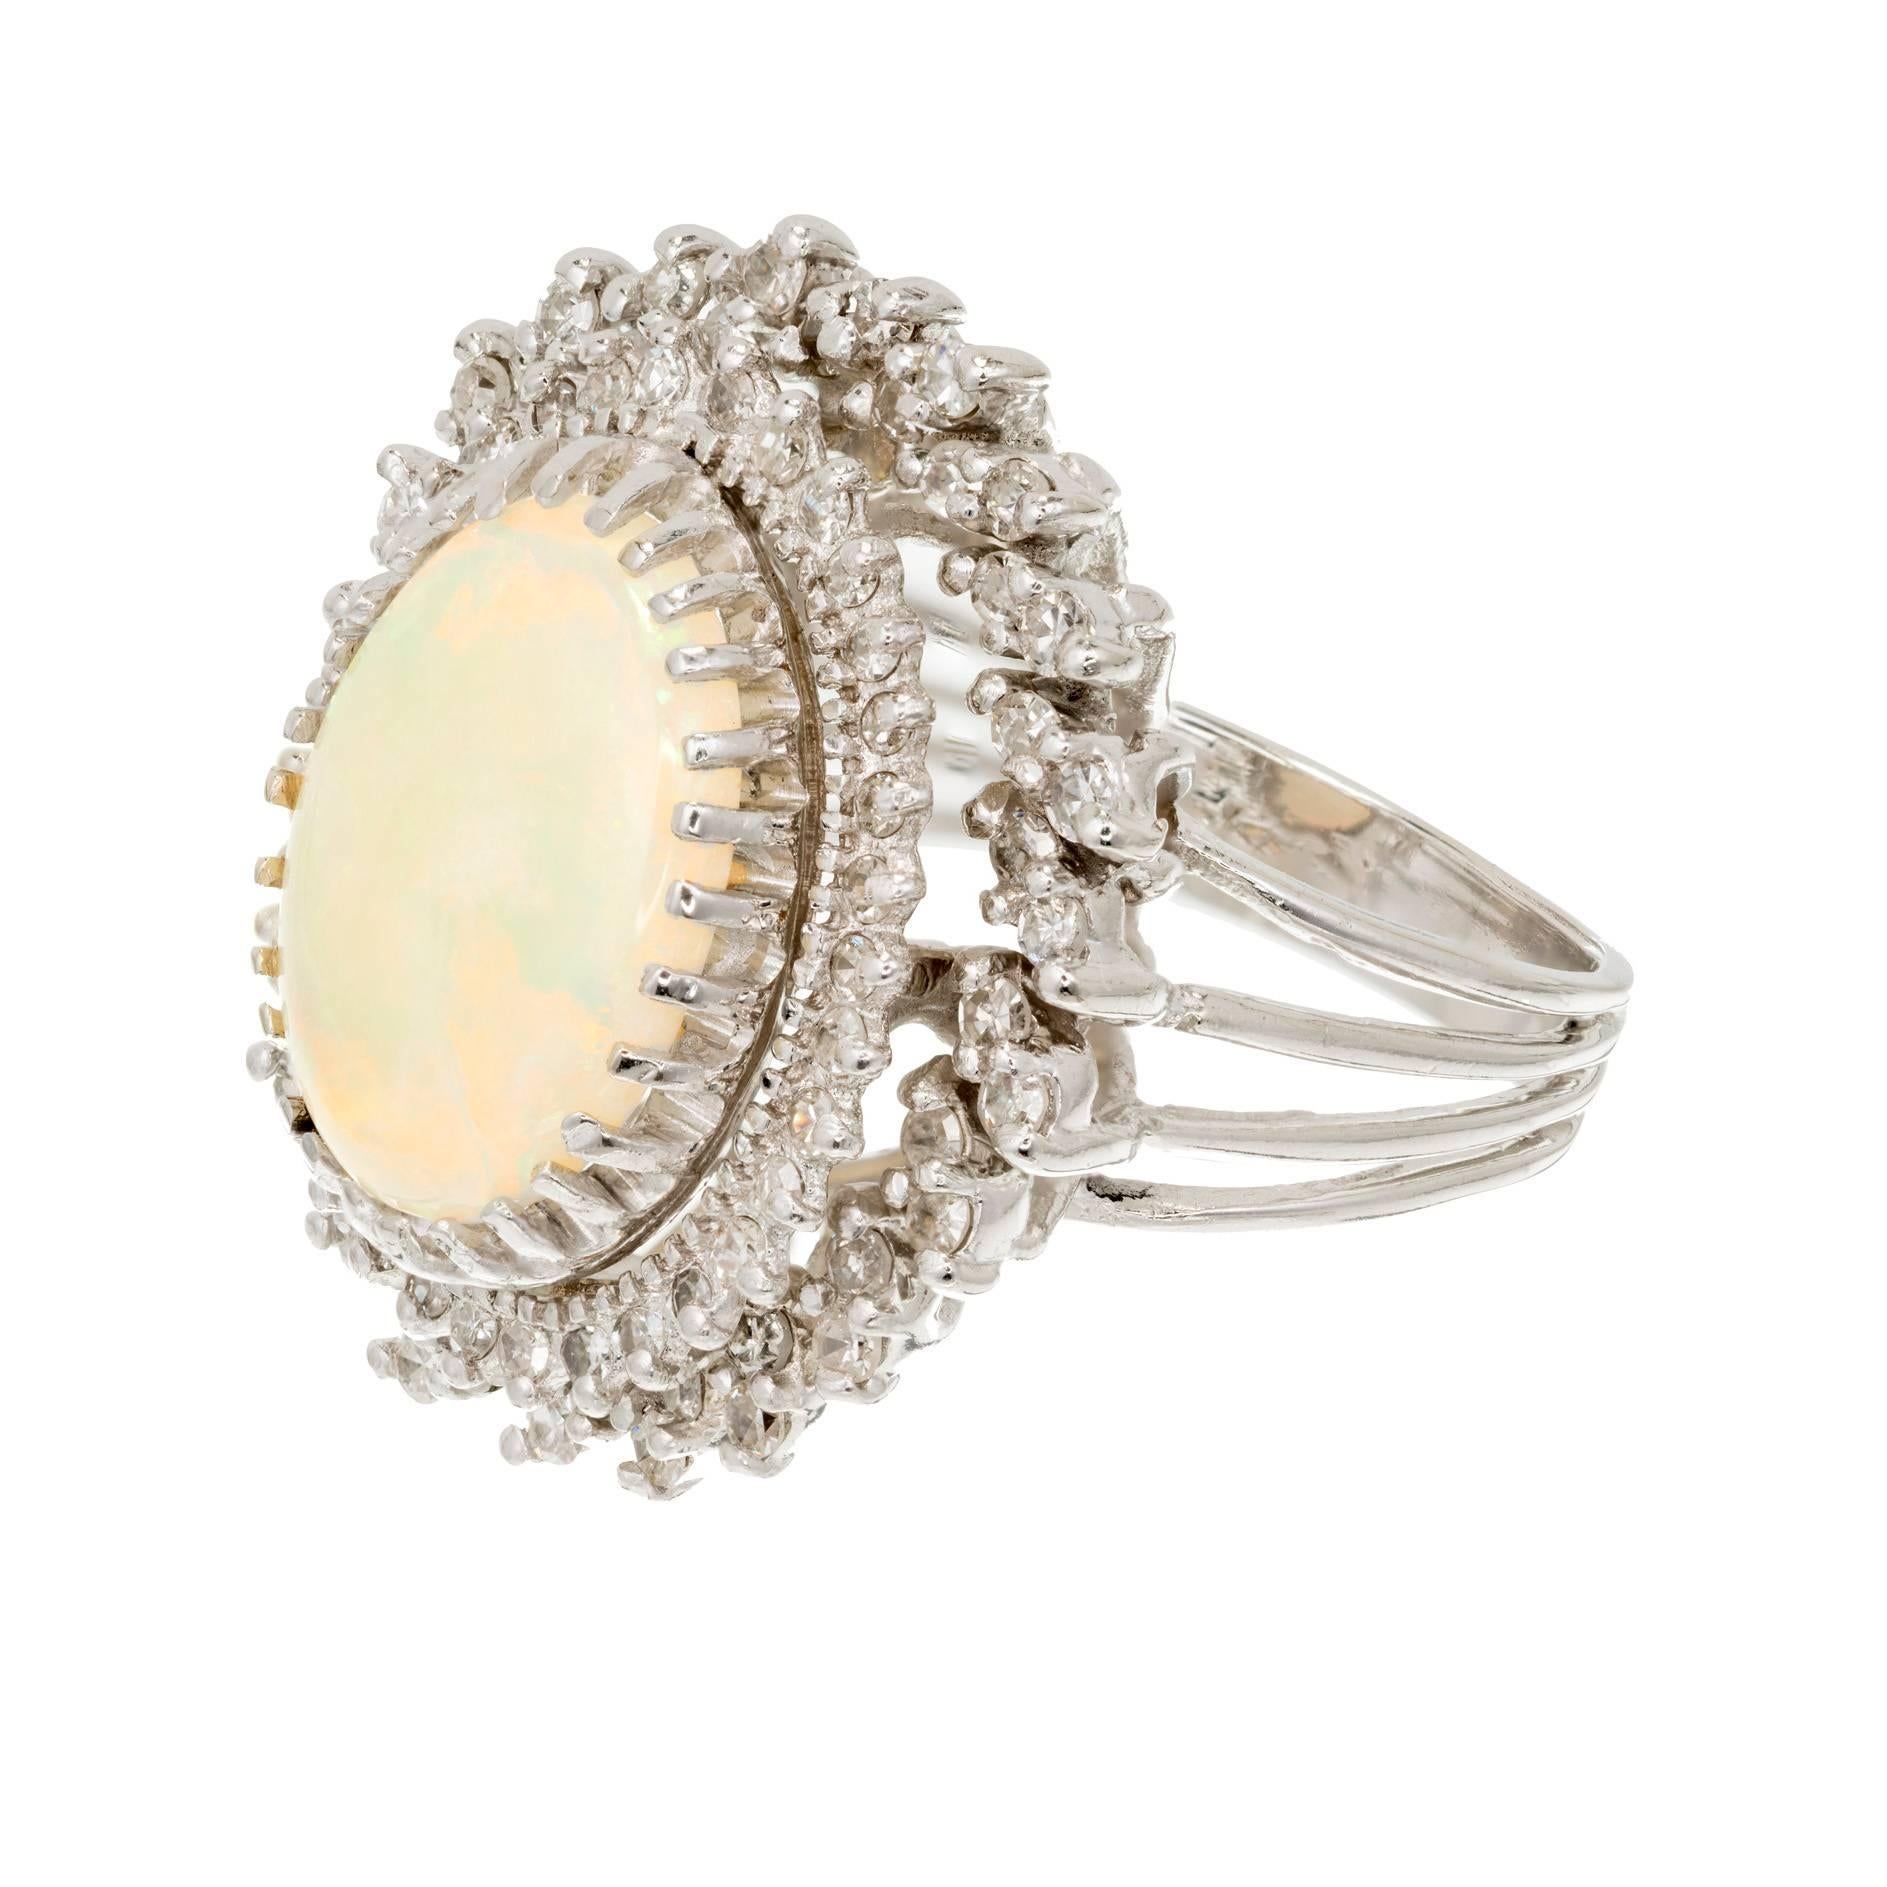 1950s large opal and diamond 14k white gold dinner style cocktail ring. 4.50ct oval well-polished Opal with great color flash surrounded by 3 rows of full cut diamonds.

1 white, with blue green orange flash natural color Opal, approx. total weight